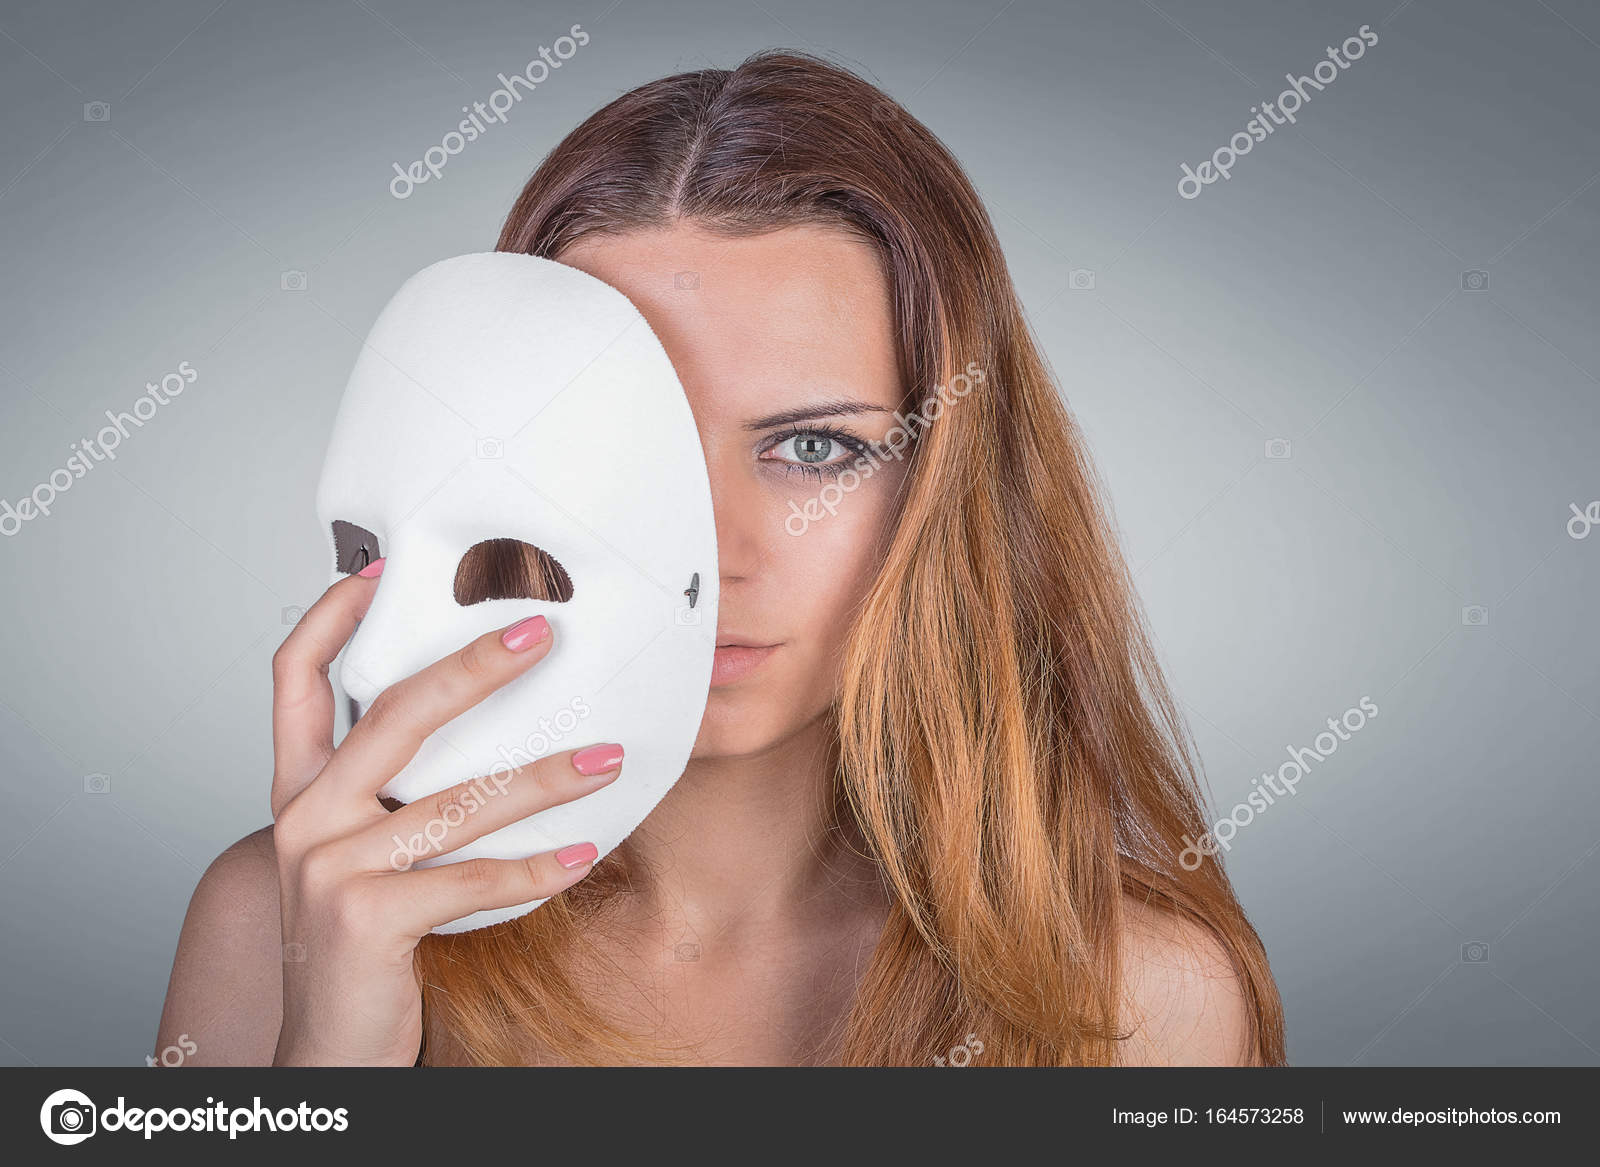 Young emotional woman holding mask in pose in studio on Stock Photo by 164573258